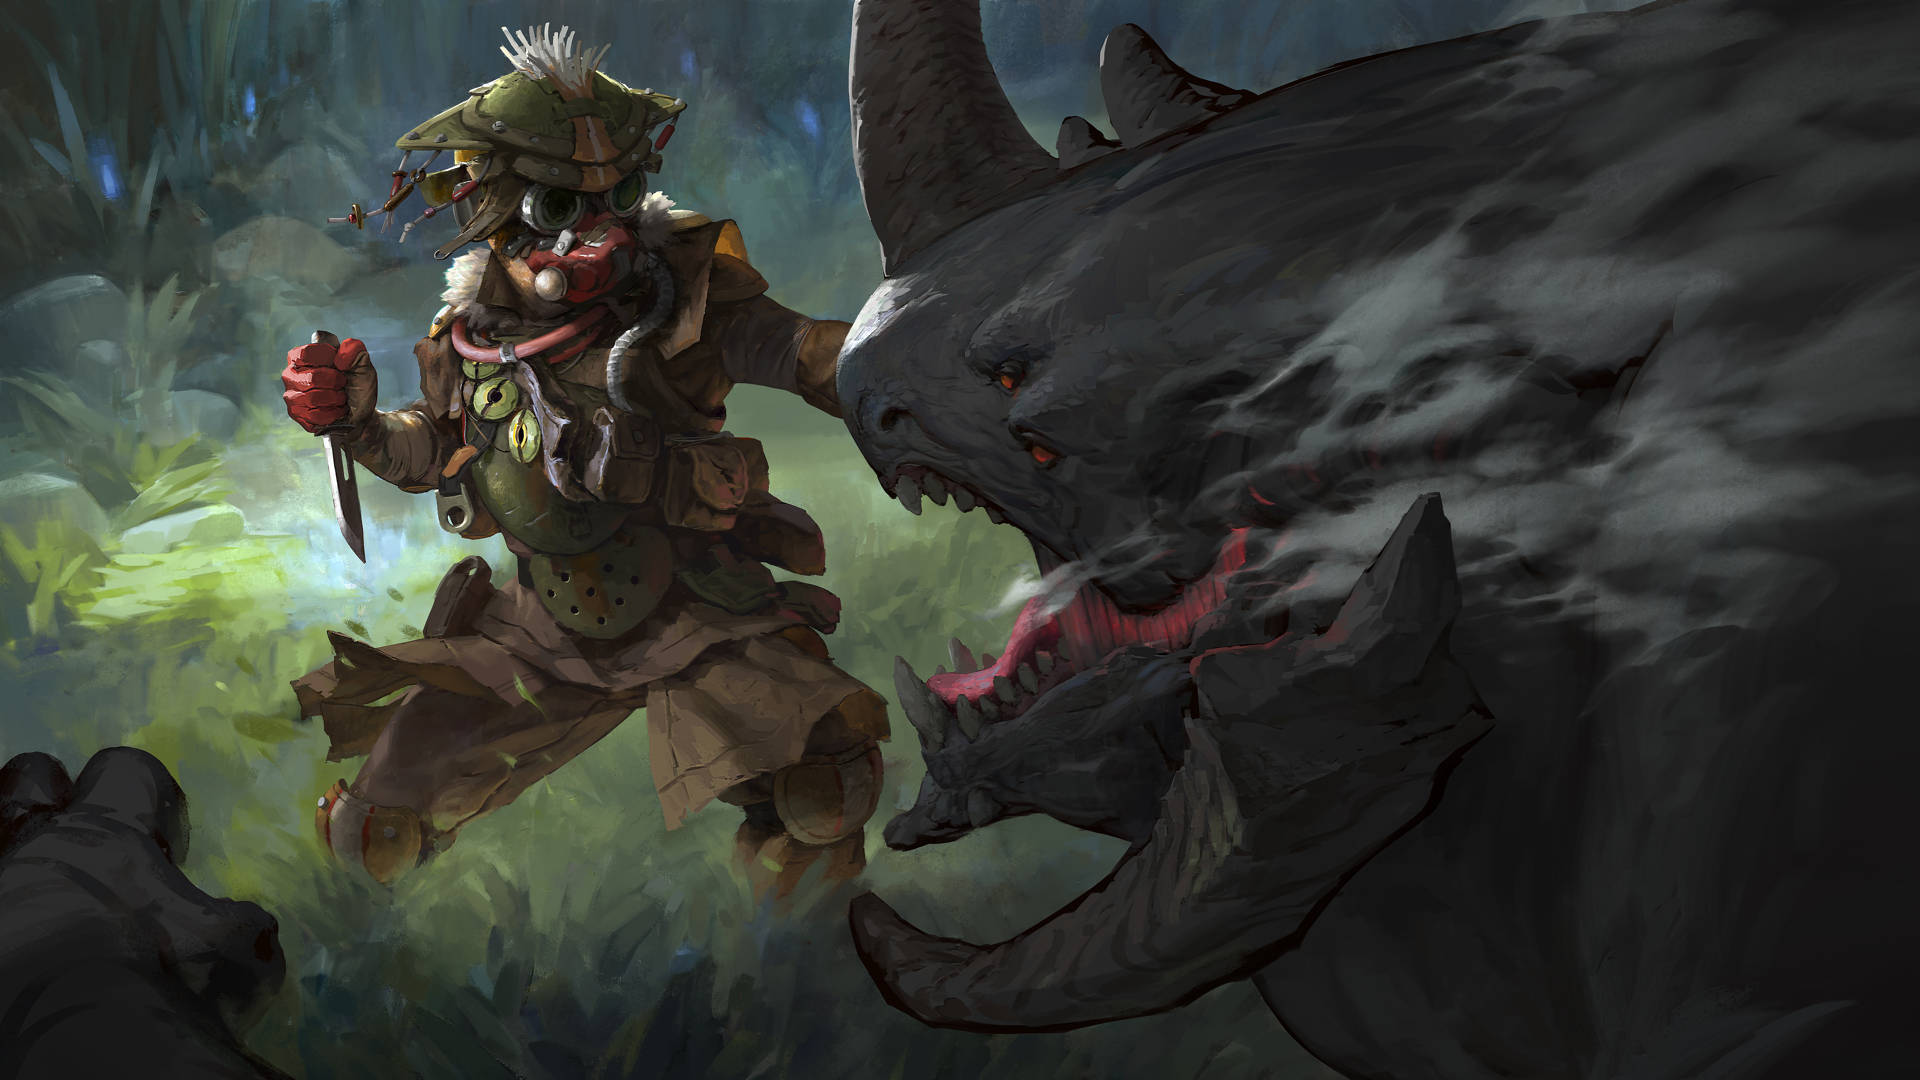 "Witness the ferocity and cunning of Apex Legends' Bloodhound in action". Wallpaper